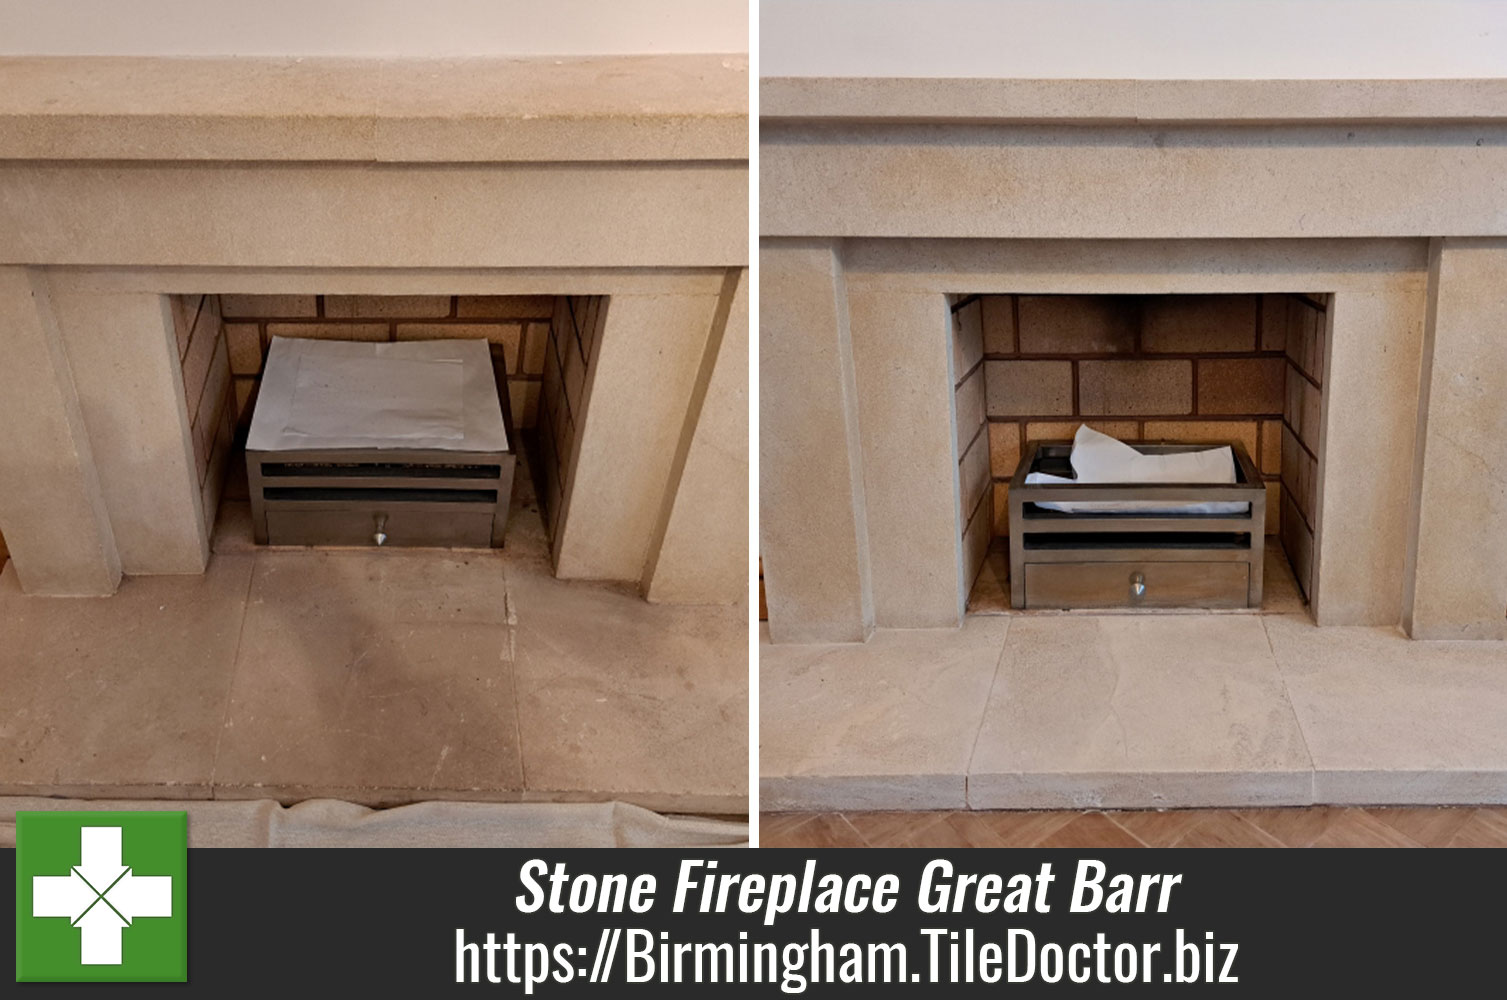 Cleaning a Stone Fireplace with Tile Doctor Oxy-Gelin Great Barr Birmingham